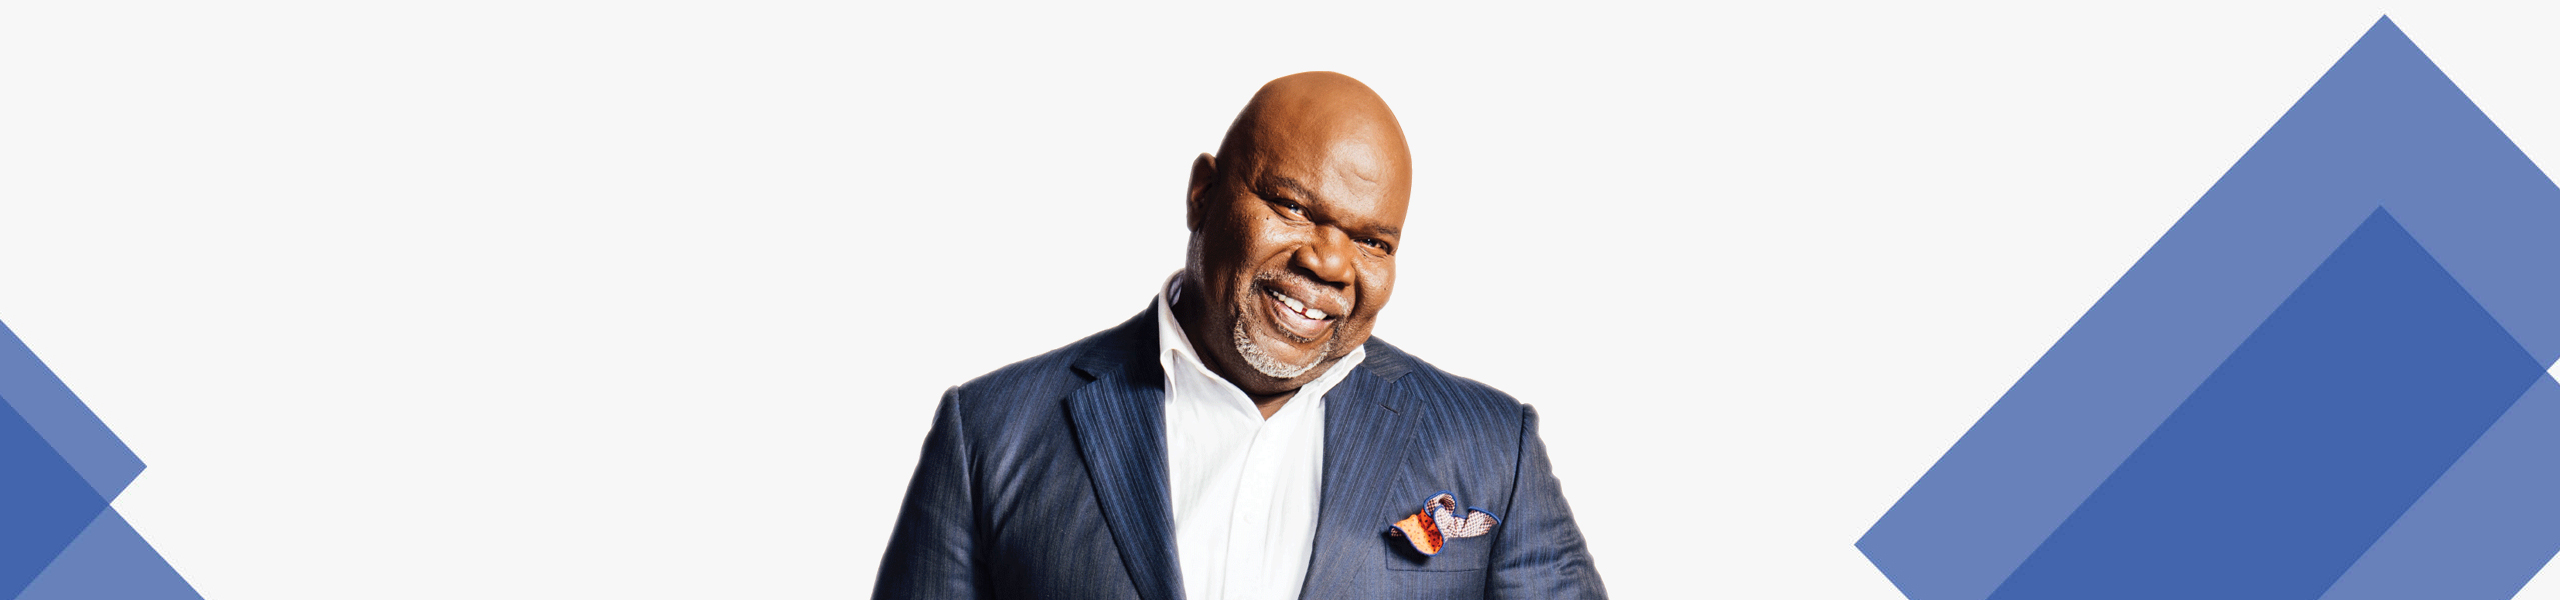 T.D. Jakes | Assorted